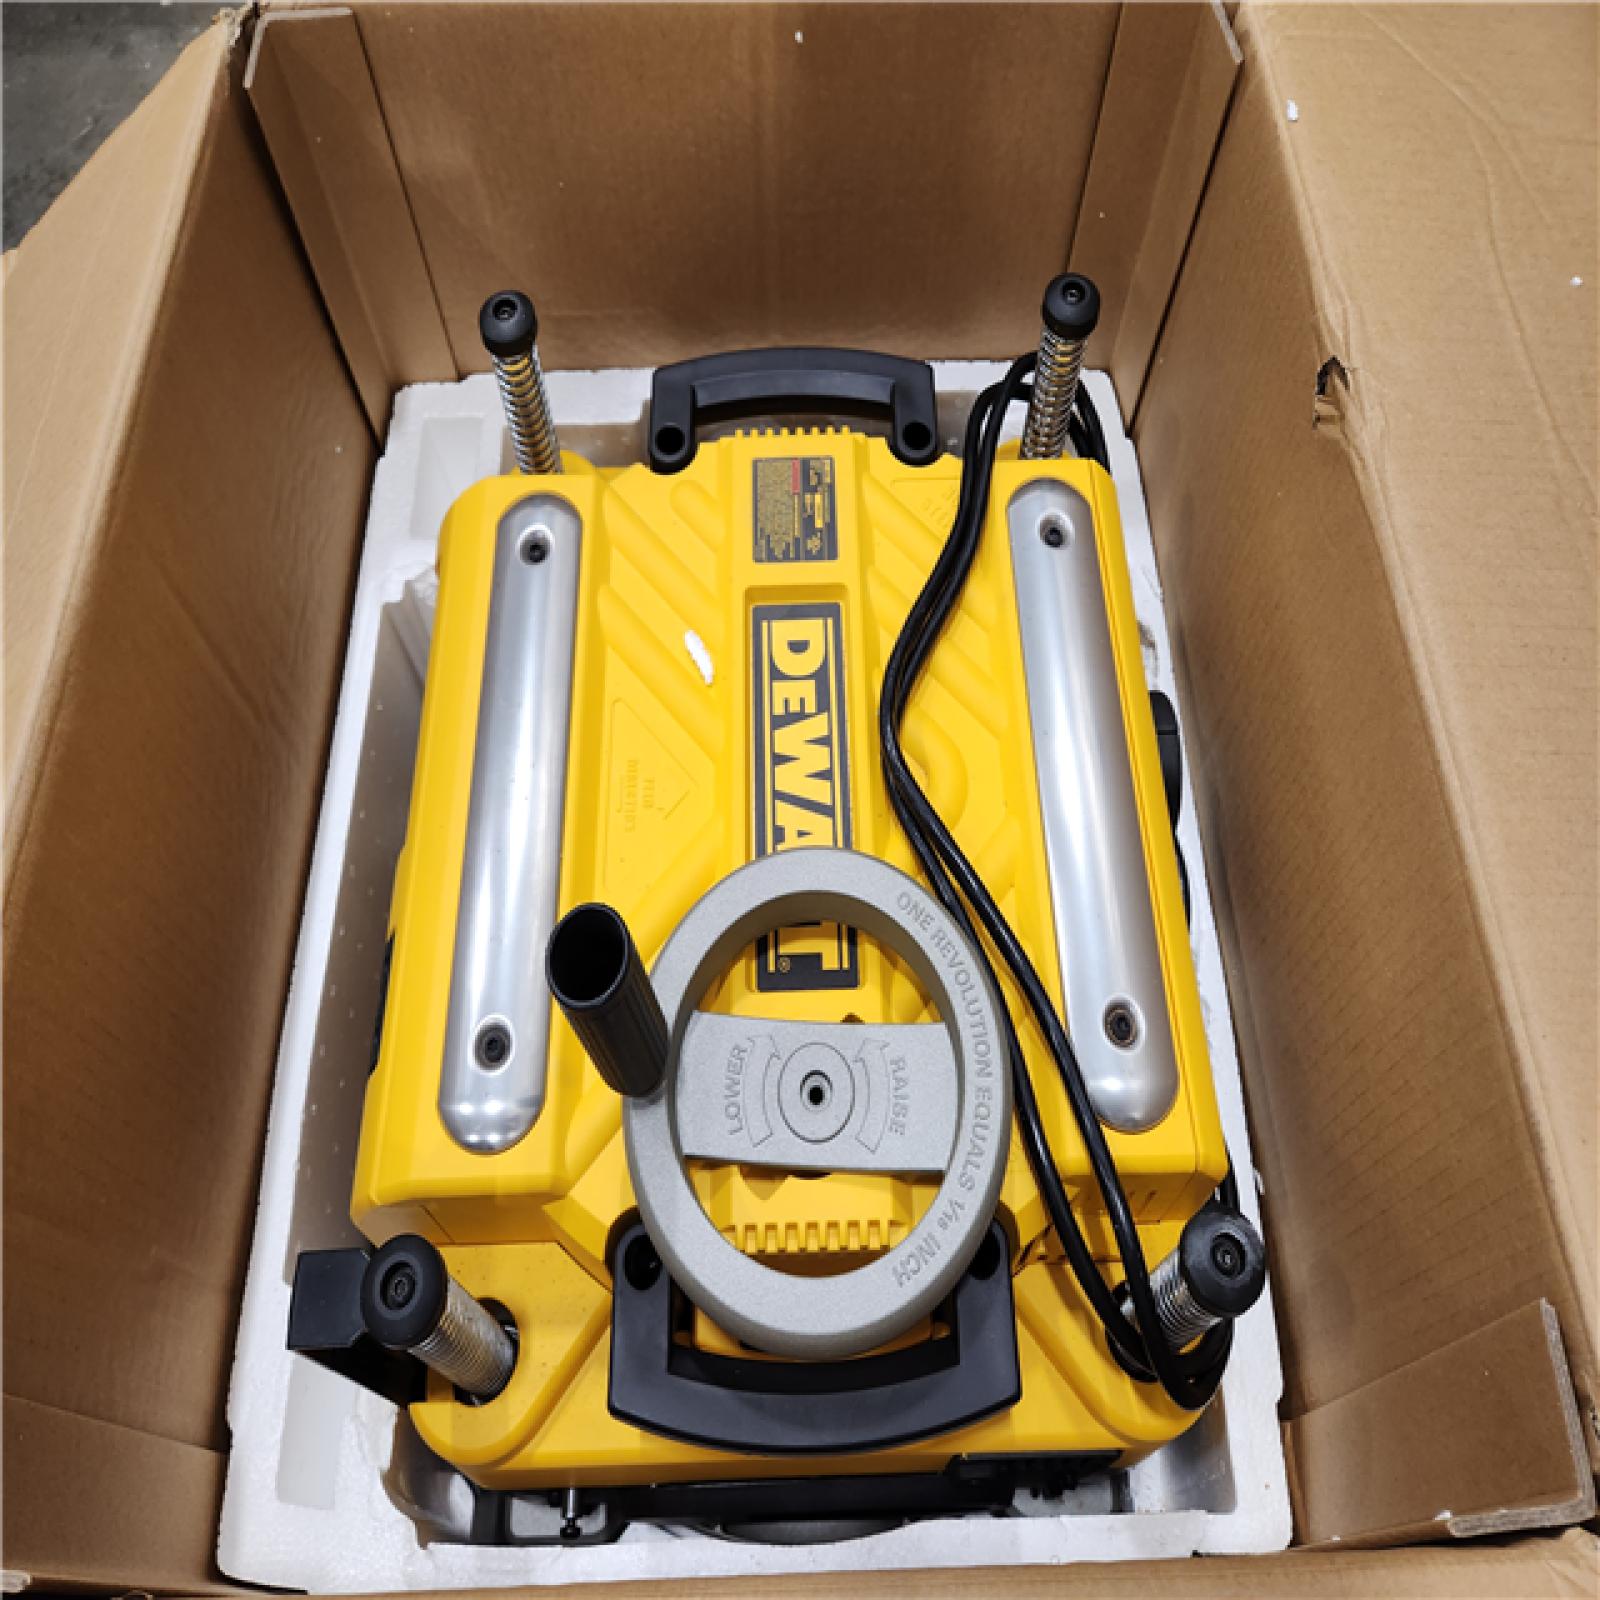 AS-IS DEWALT 15 Amp Corded 13 in. Two-Speed Thickness Planer